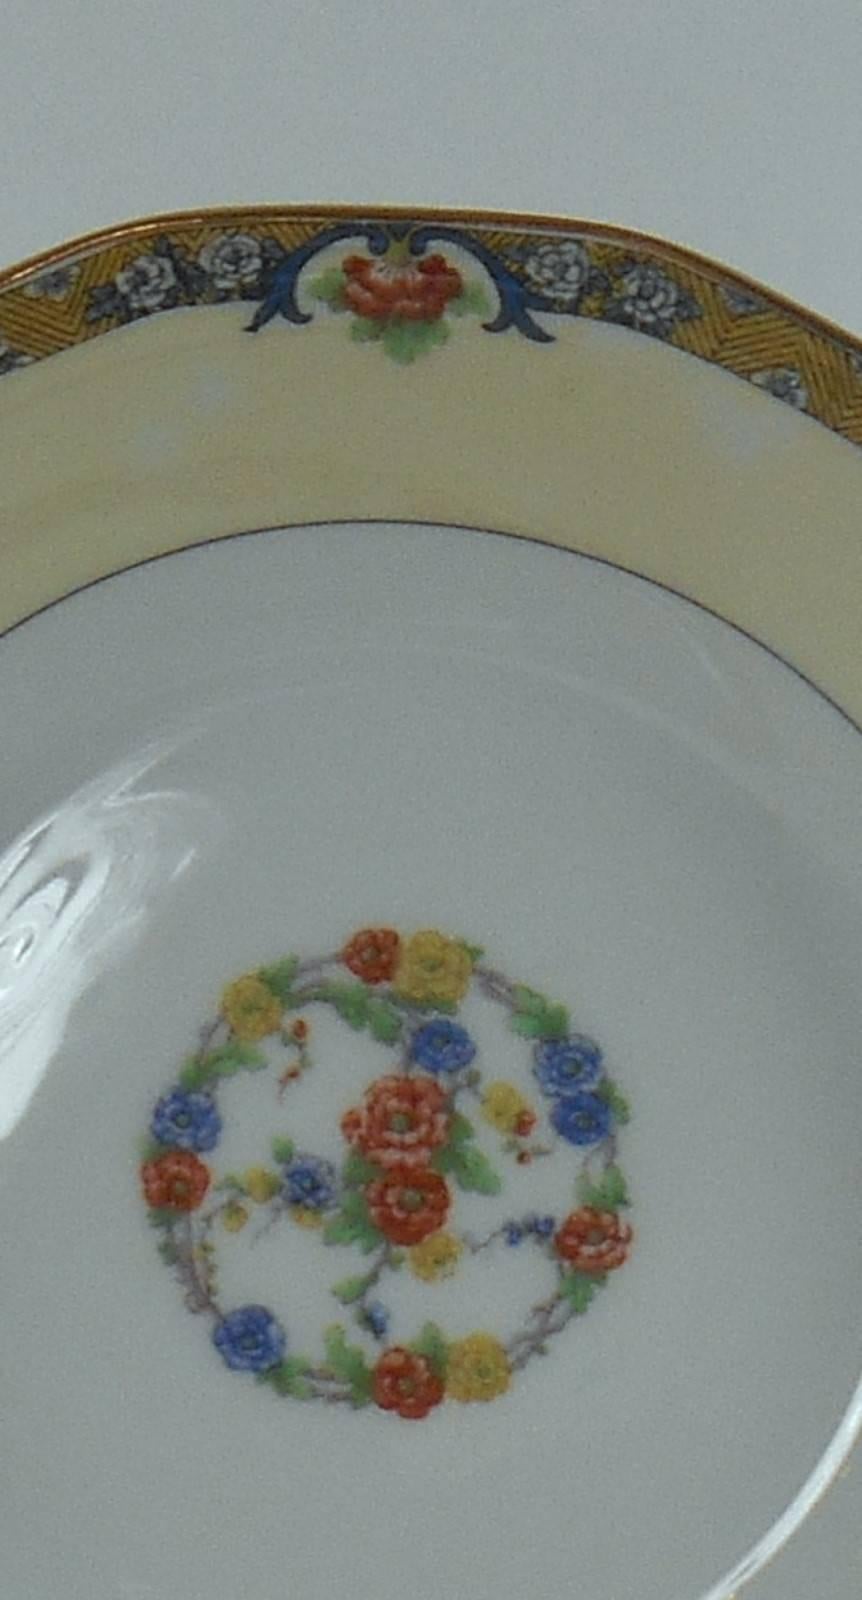 CHINA FINDERS 

China, Crystal, Flatware and Collectible Matching Service is offering ONE (1) 

HAVILAND Limoges France CHENONCEAUX pattern 46-piece SET SERVICE 

in great condition free from chips, cracks, break, stain, or discoloration and